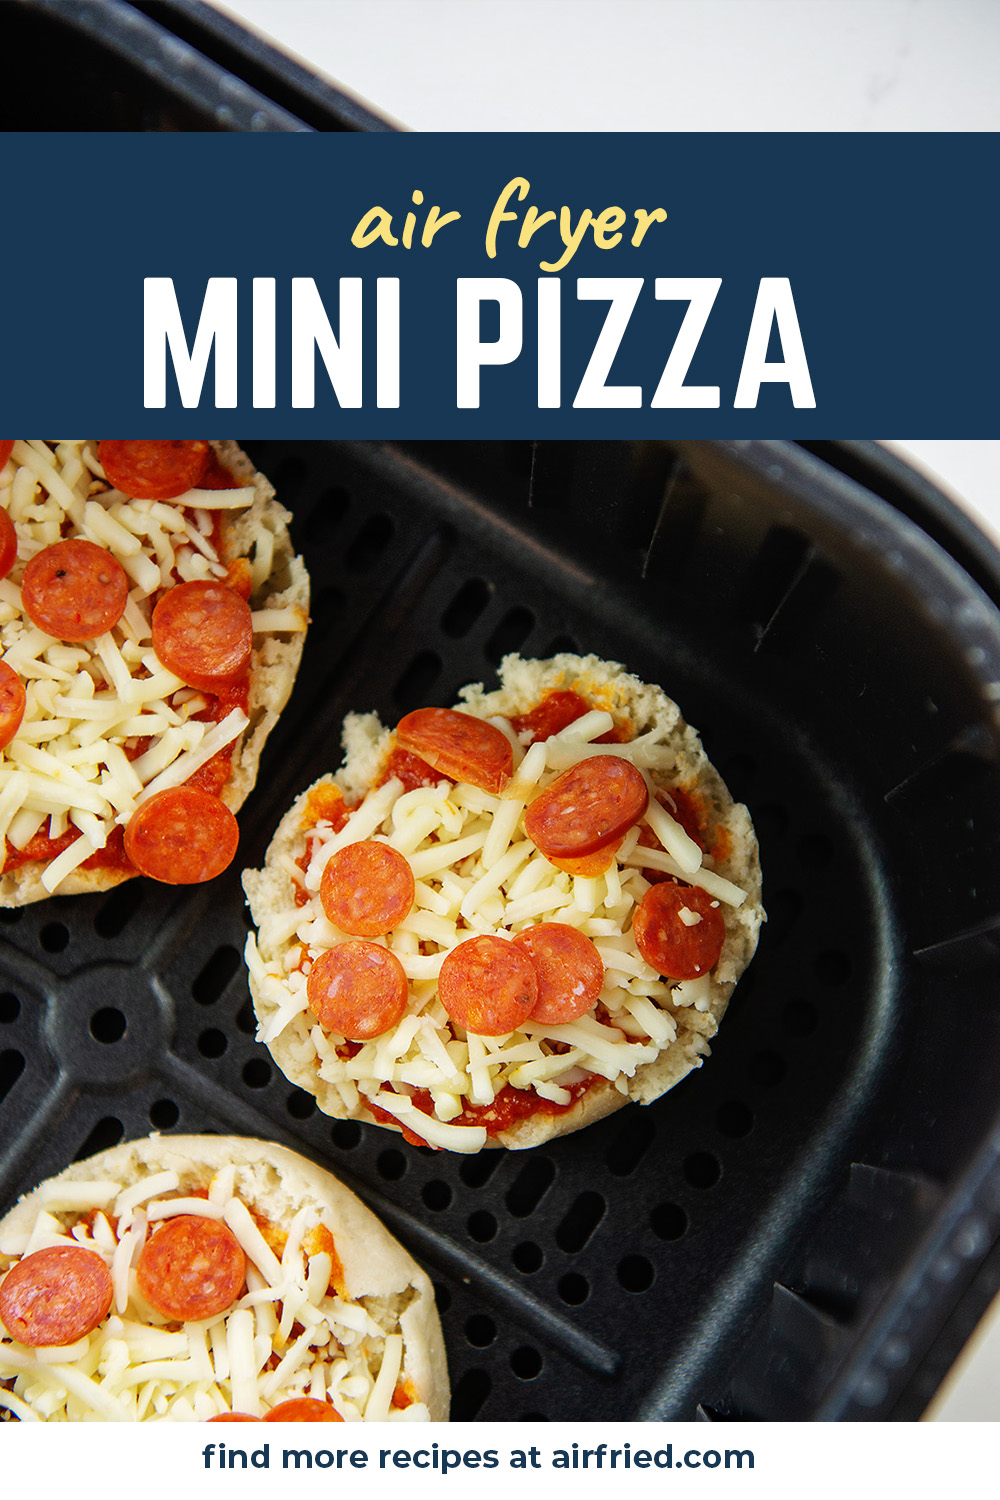 These air fryer mini pizzas are made with English muffins and topped with your favorite toppings!